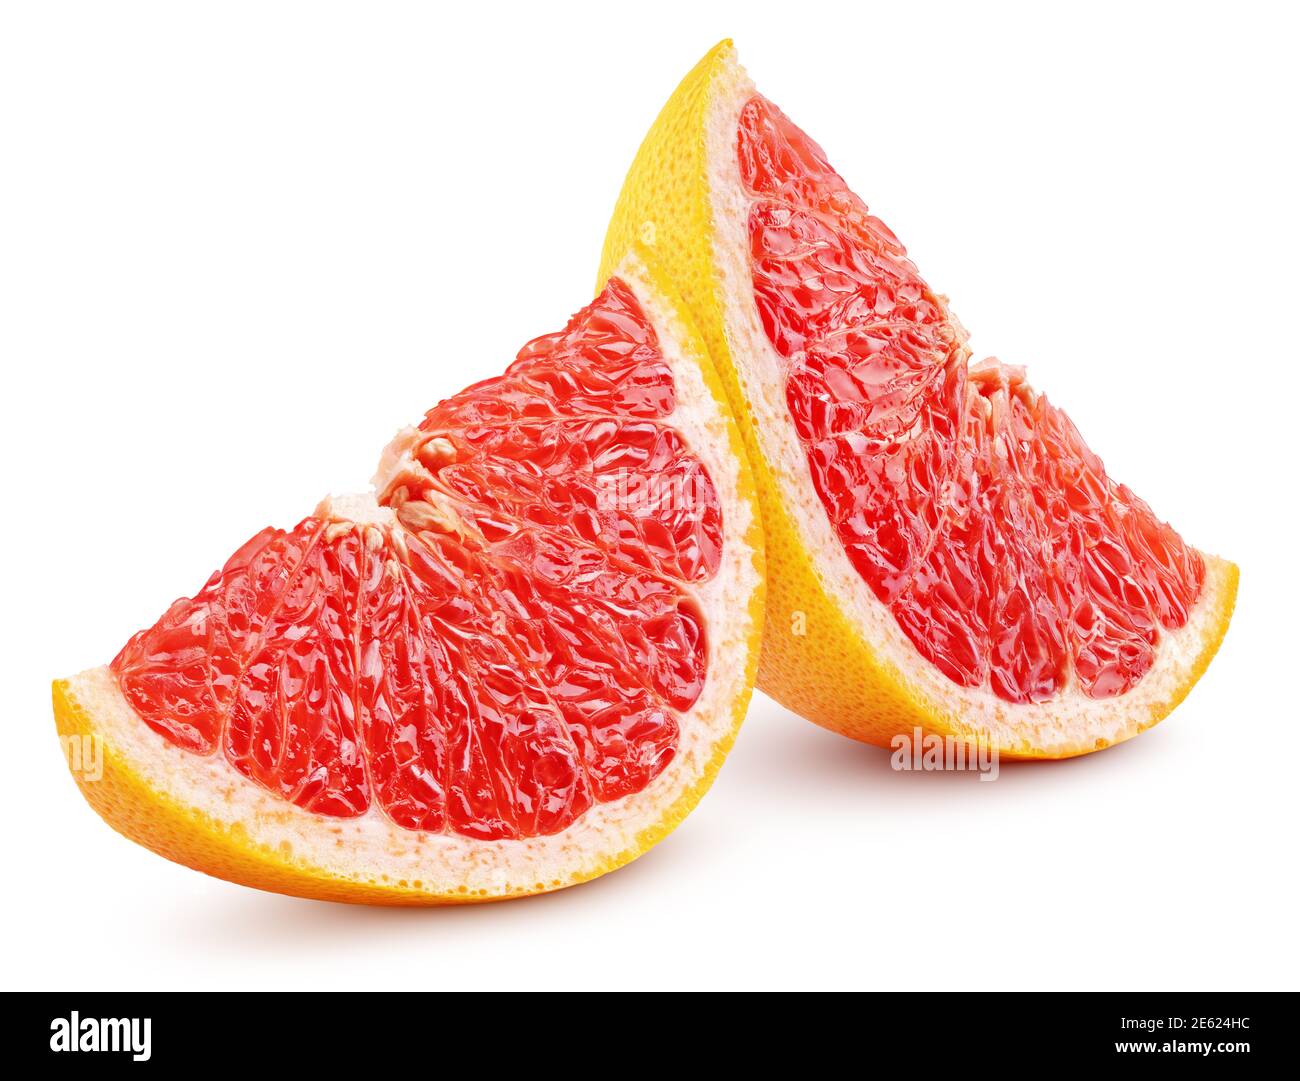 Two slices of grapefruit citrus fruit isolated on white background with clipping path. Full depth of field. Stock Photo